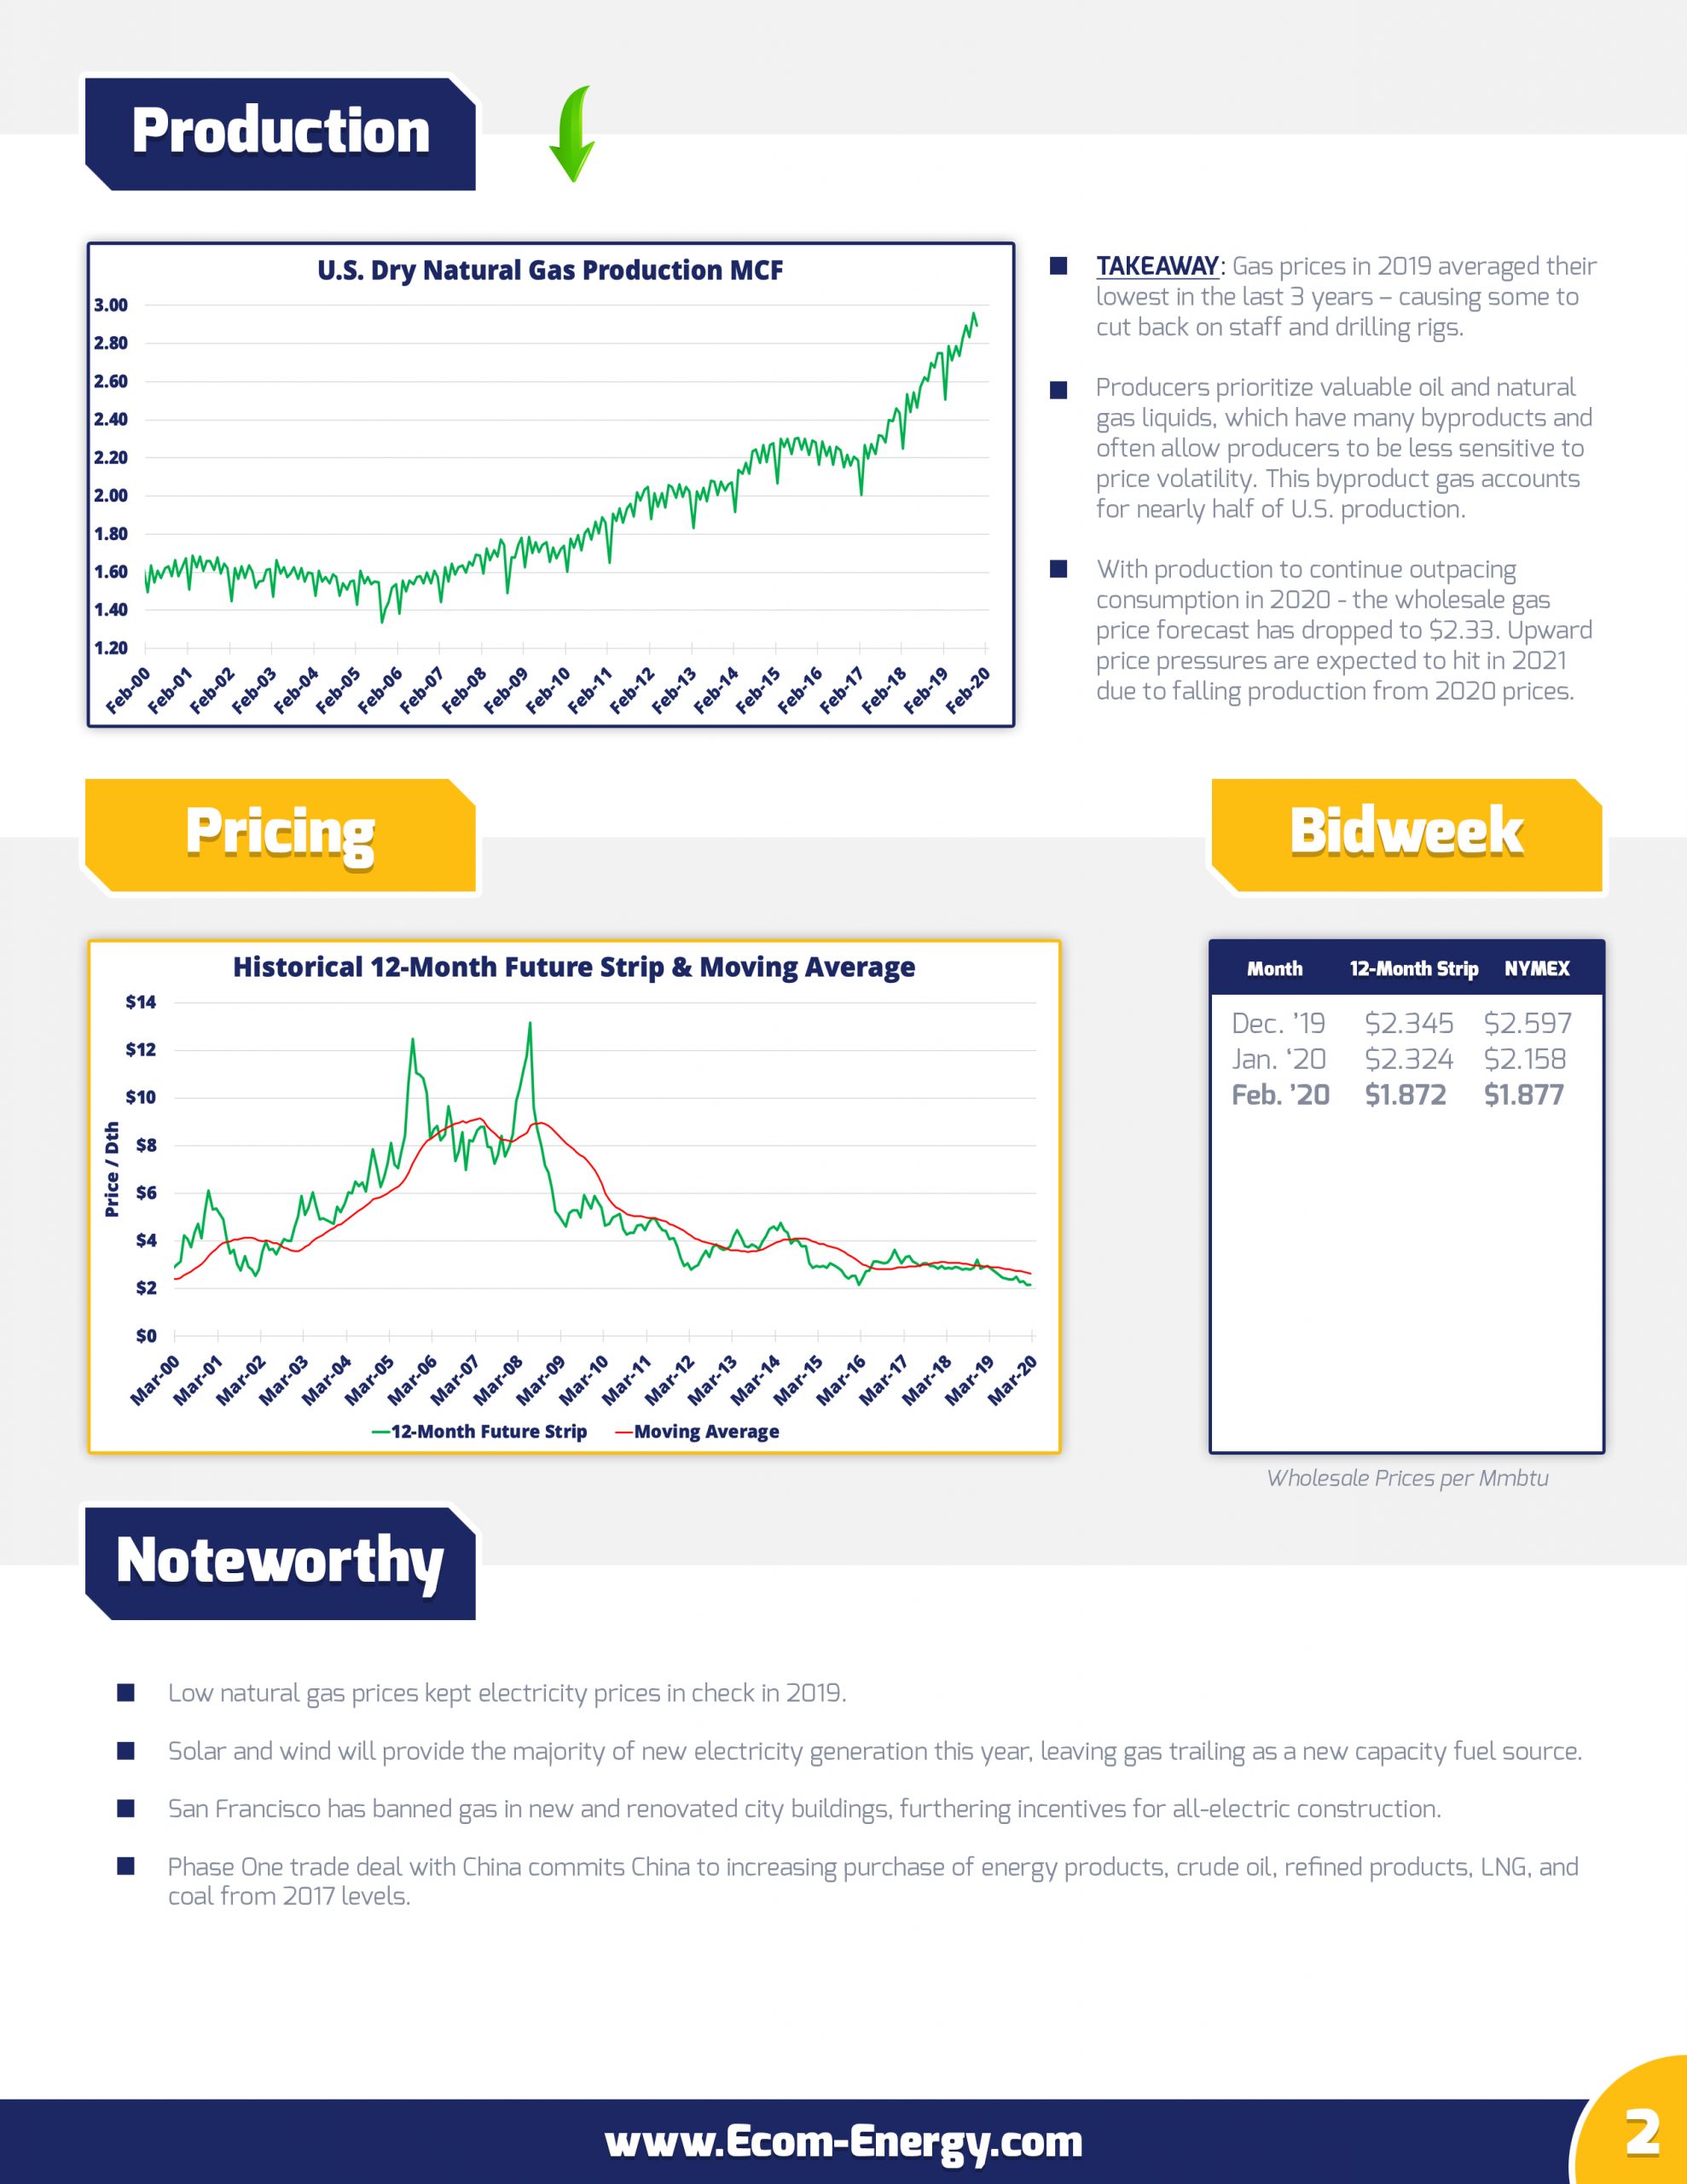 Ecom-Energy's February 2020 Market Update - Page 2